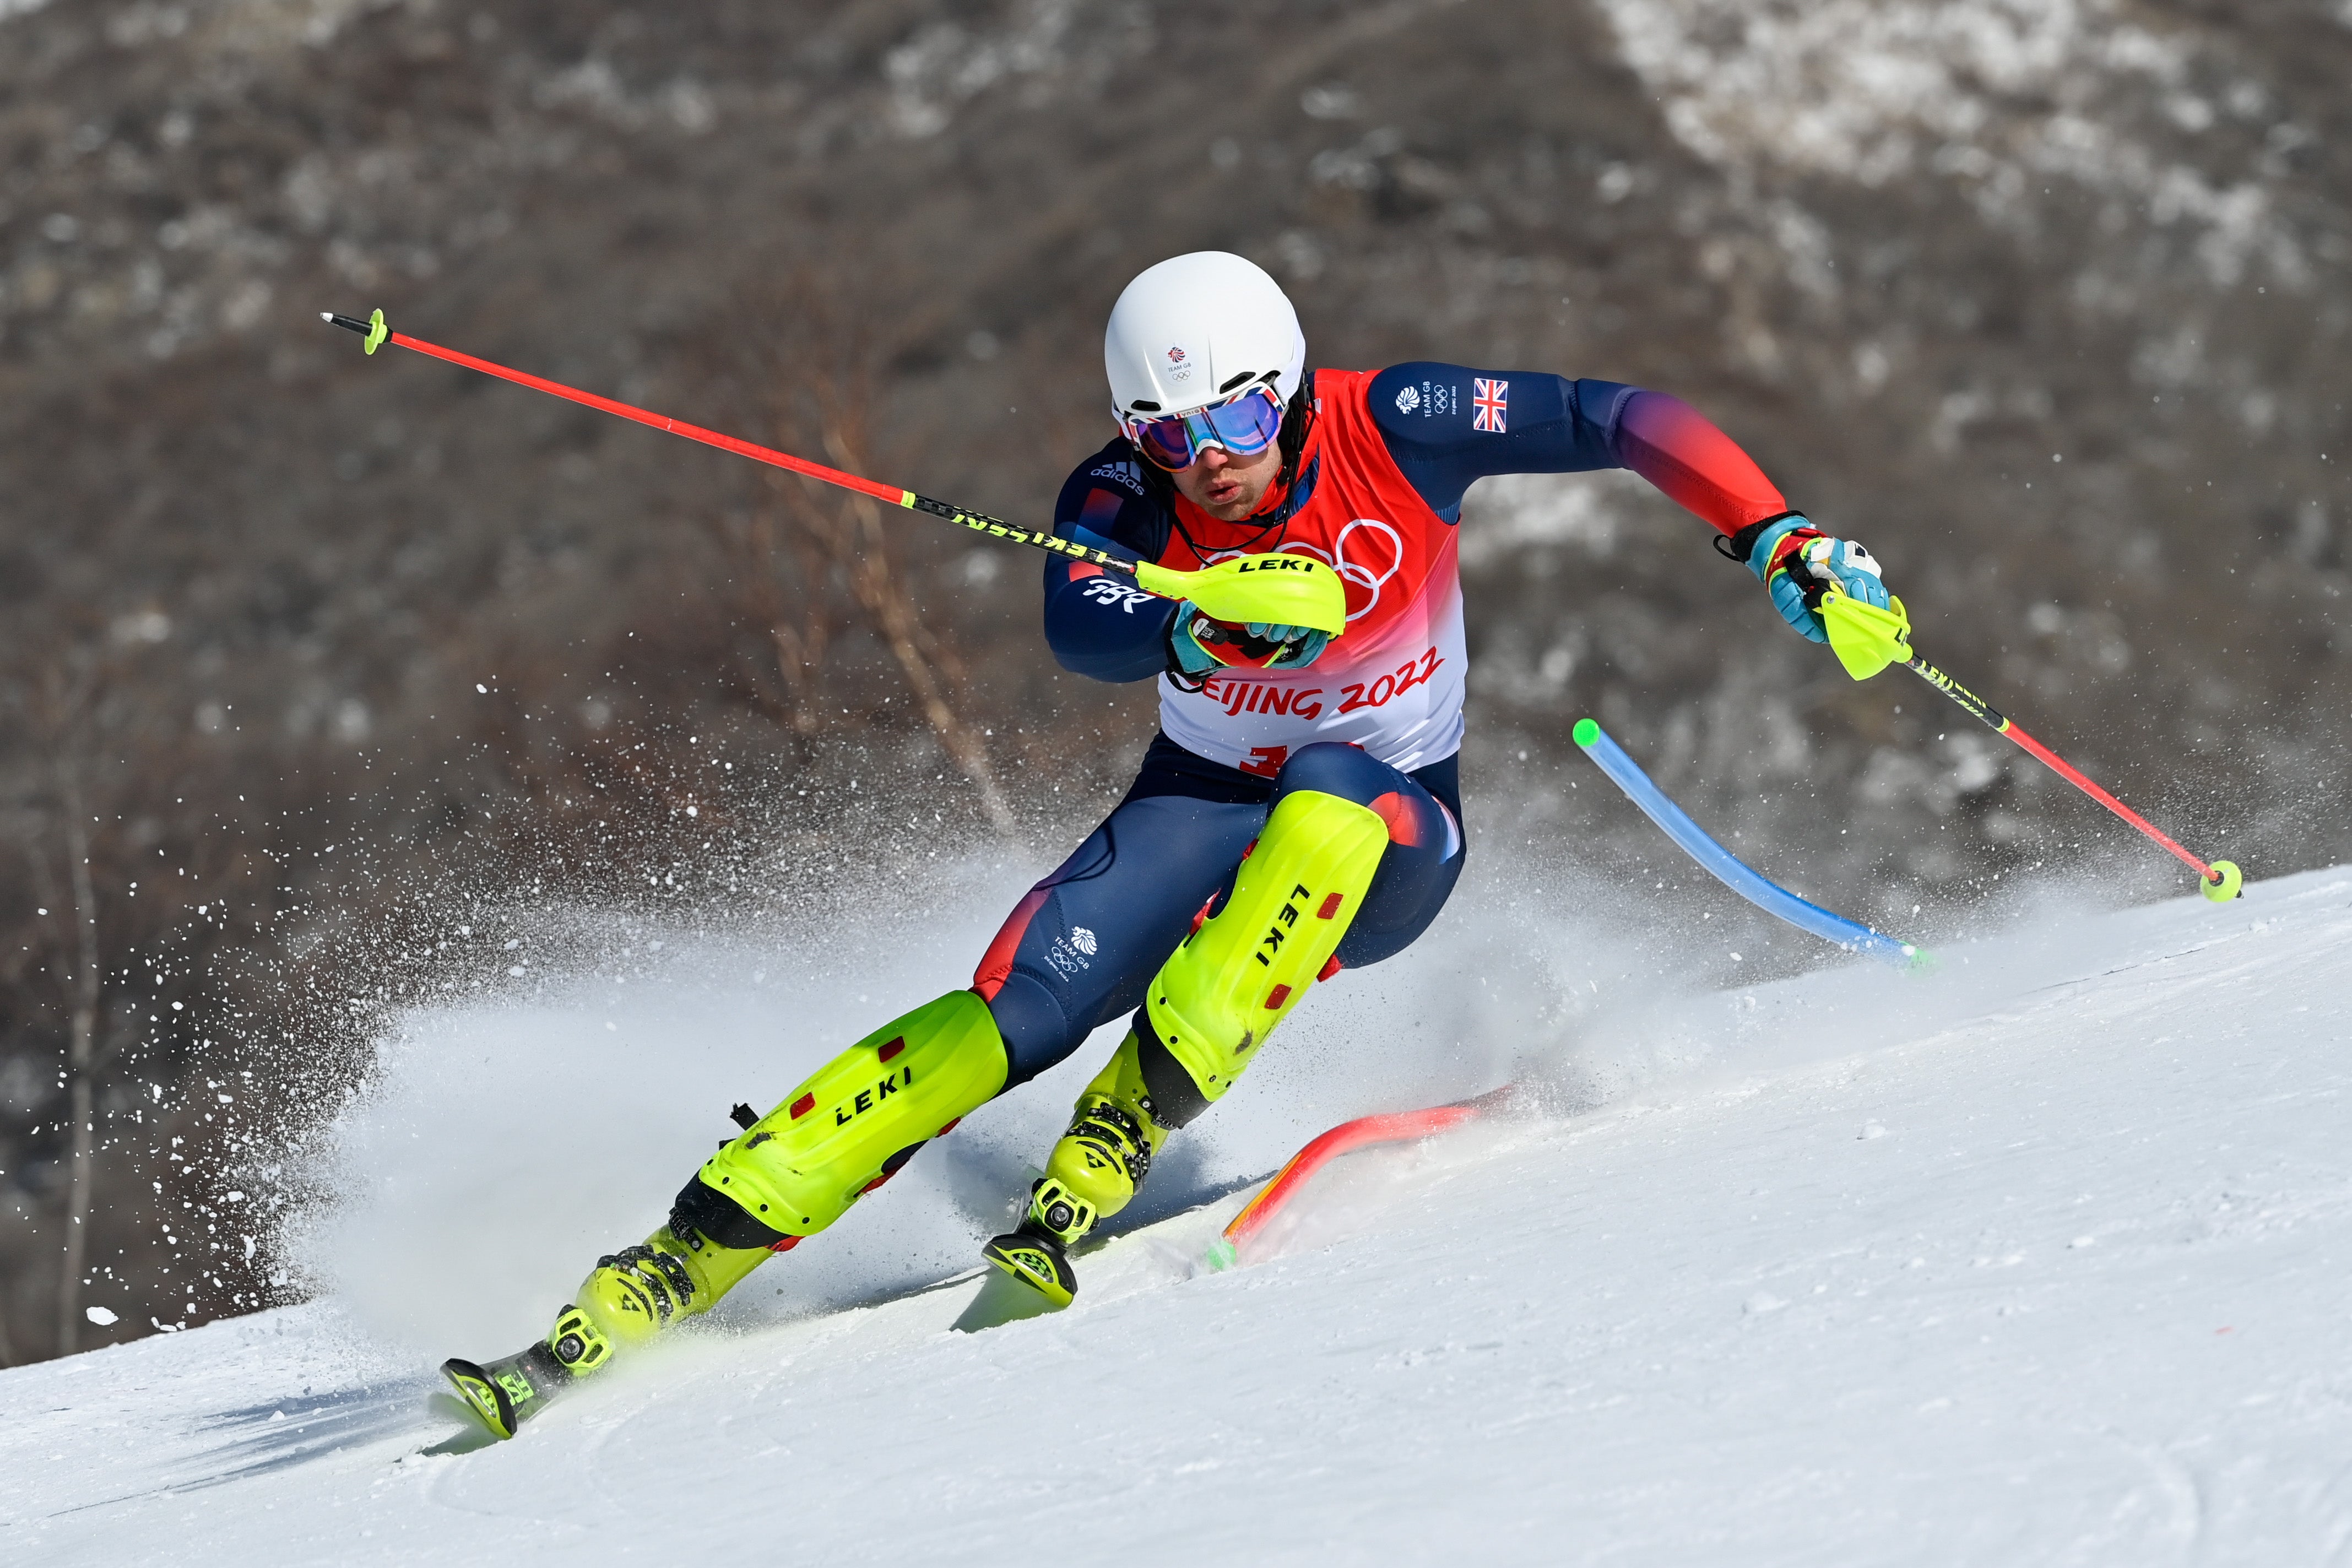 Ryding made a key mistake in the slalom